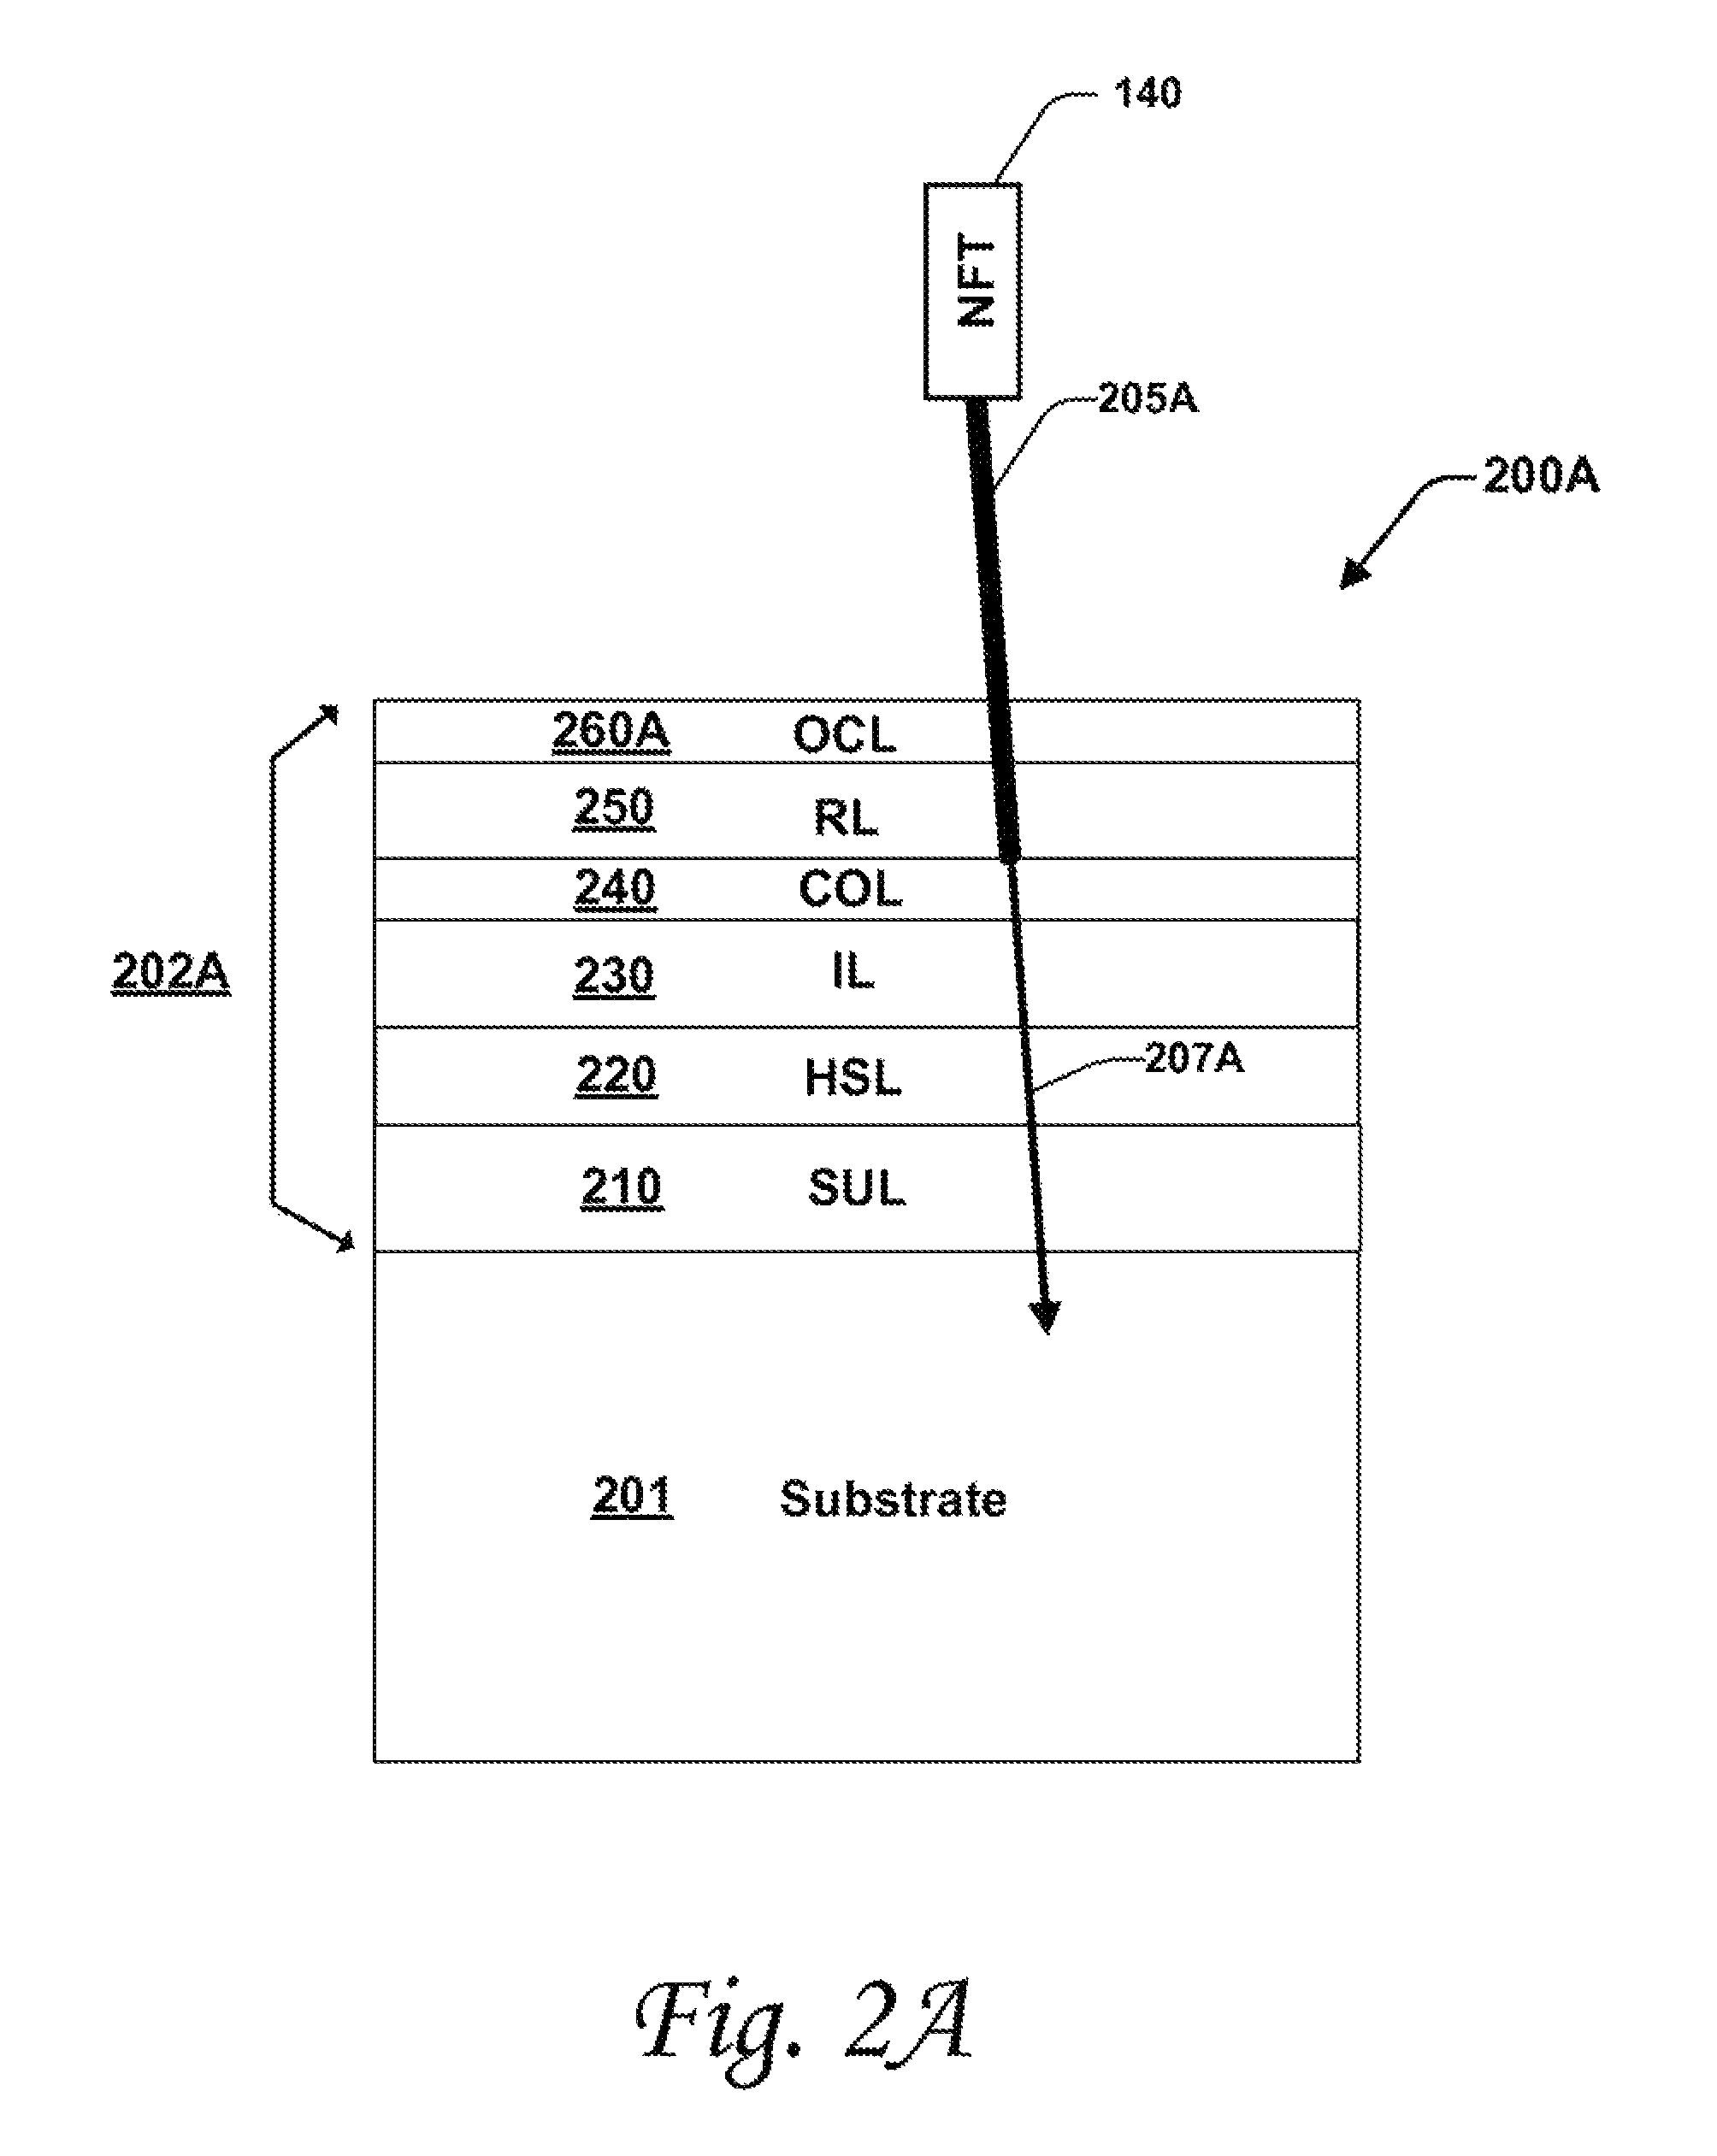 Absorption enhanced media for energy assisted magnetic recording